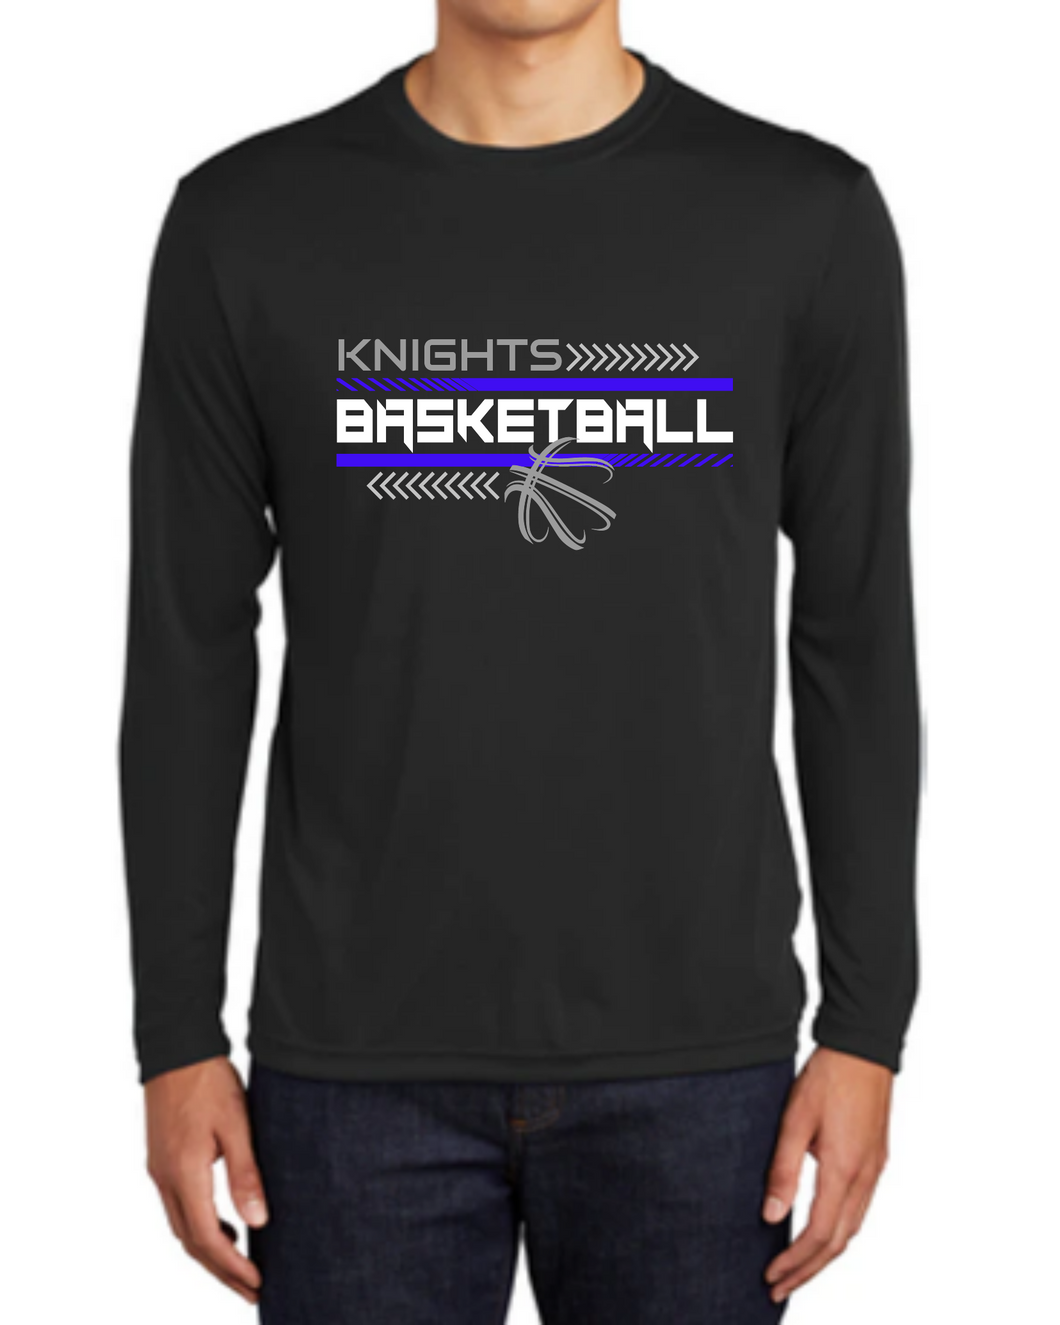 Knights Basketball Competitor Long Sleeve Tee